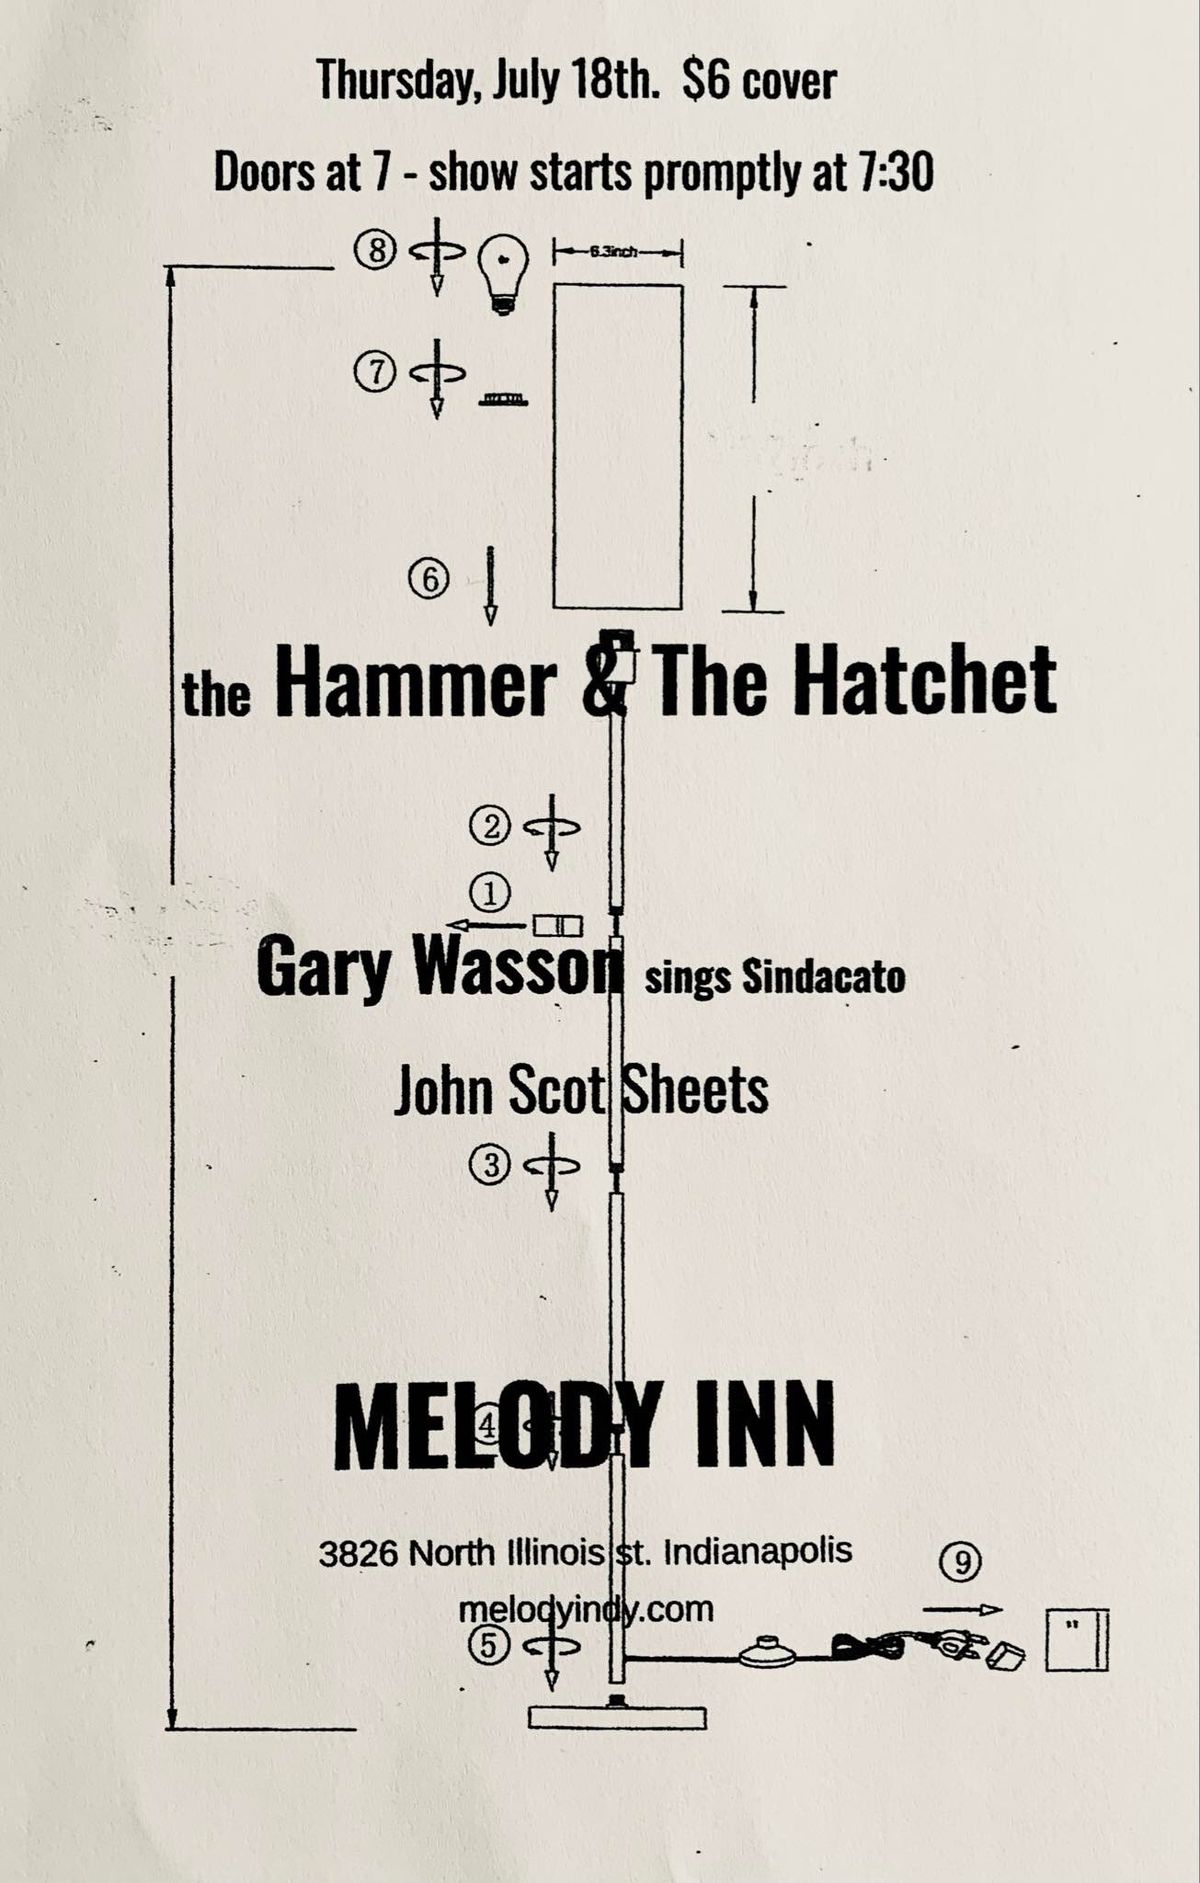 The Melody Inn Thursday with John Scot Sheets Gary Wasson and The Hammer and The Hatchet